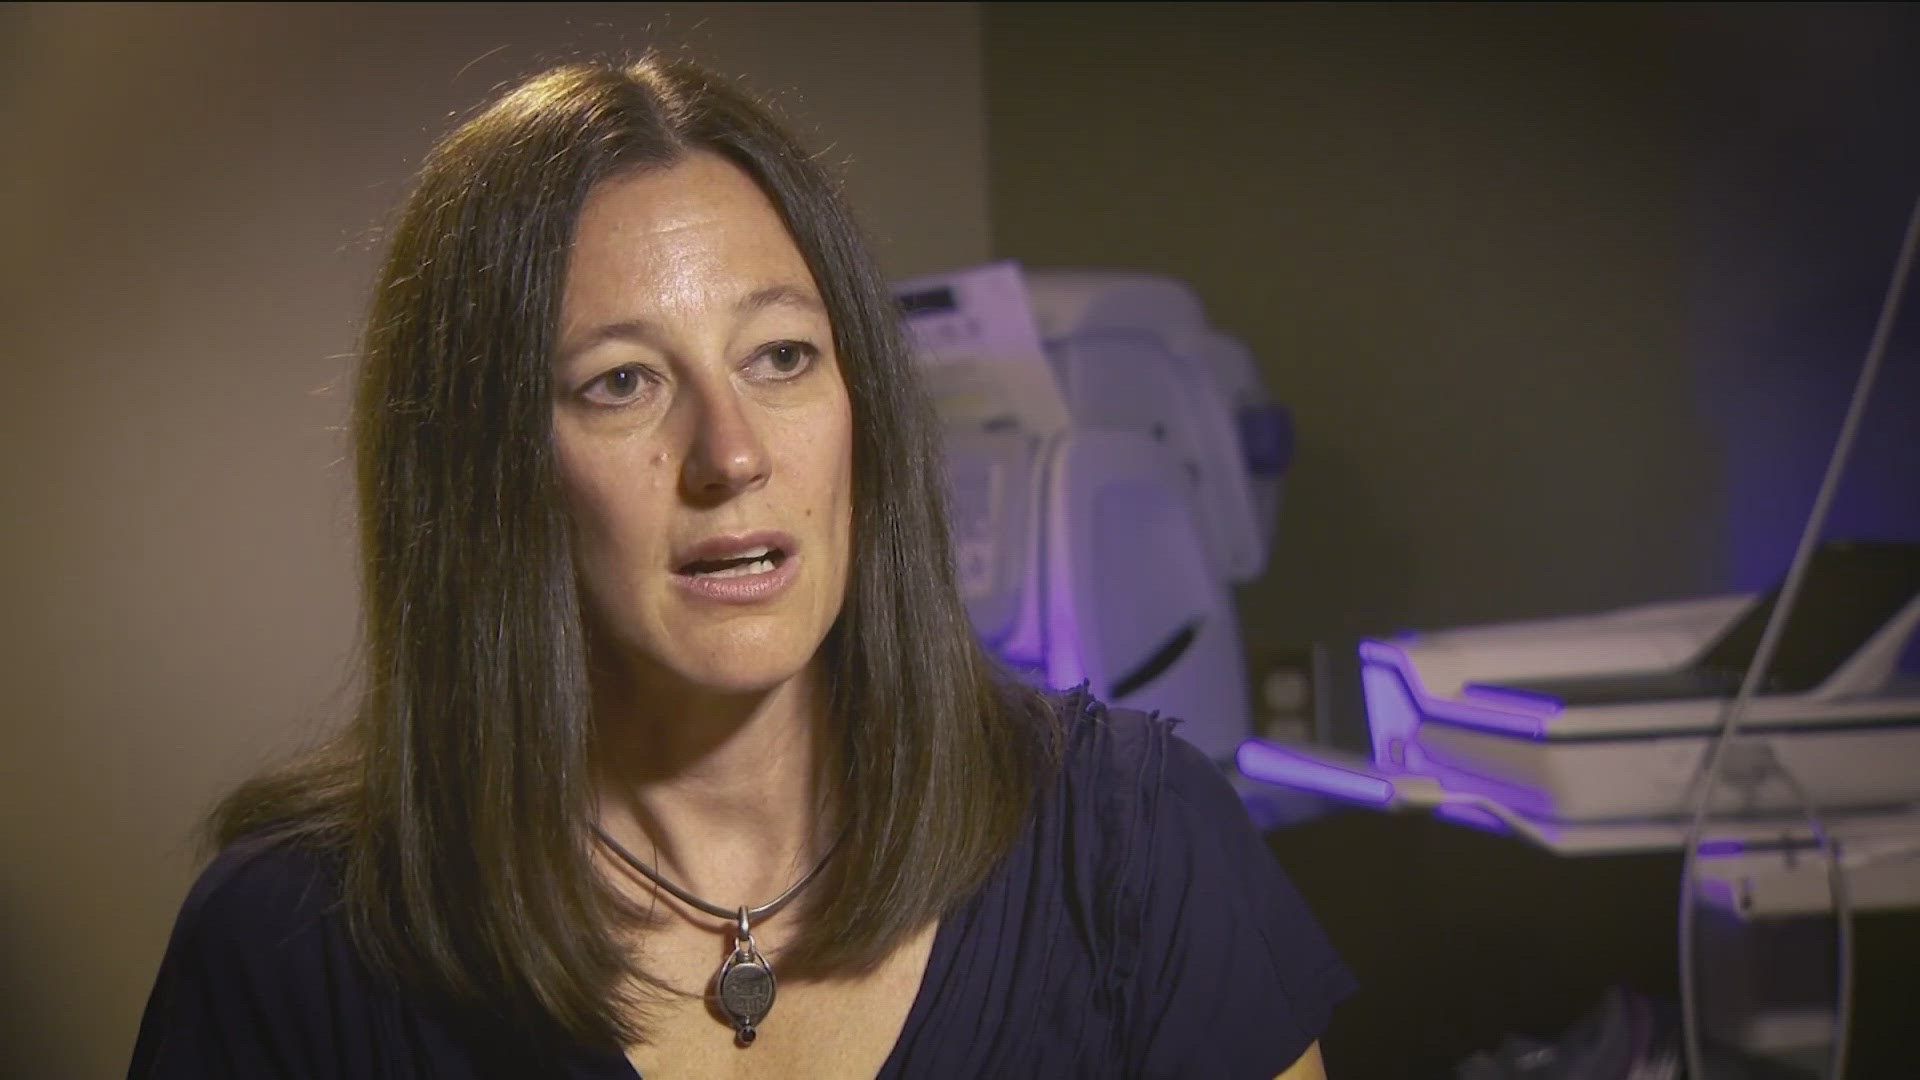 Dr. Kylie Cooper, a maternal fetal medicine specialist, told KTVB after Idaho's strict abortion laws, the law isn't clear. Also, doctors have left the state.